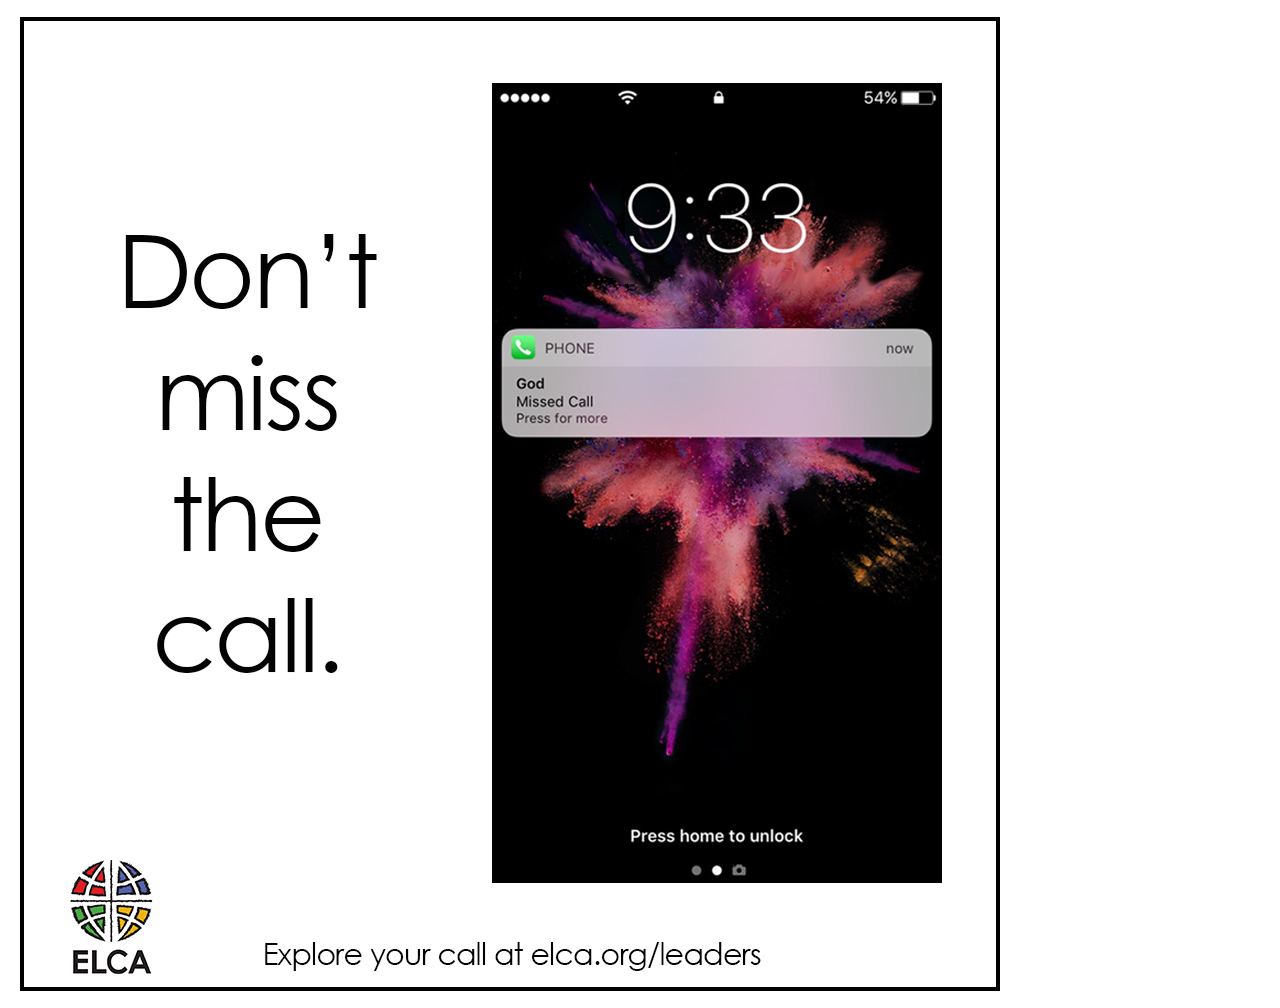 Don't miss the call.